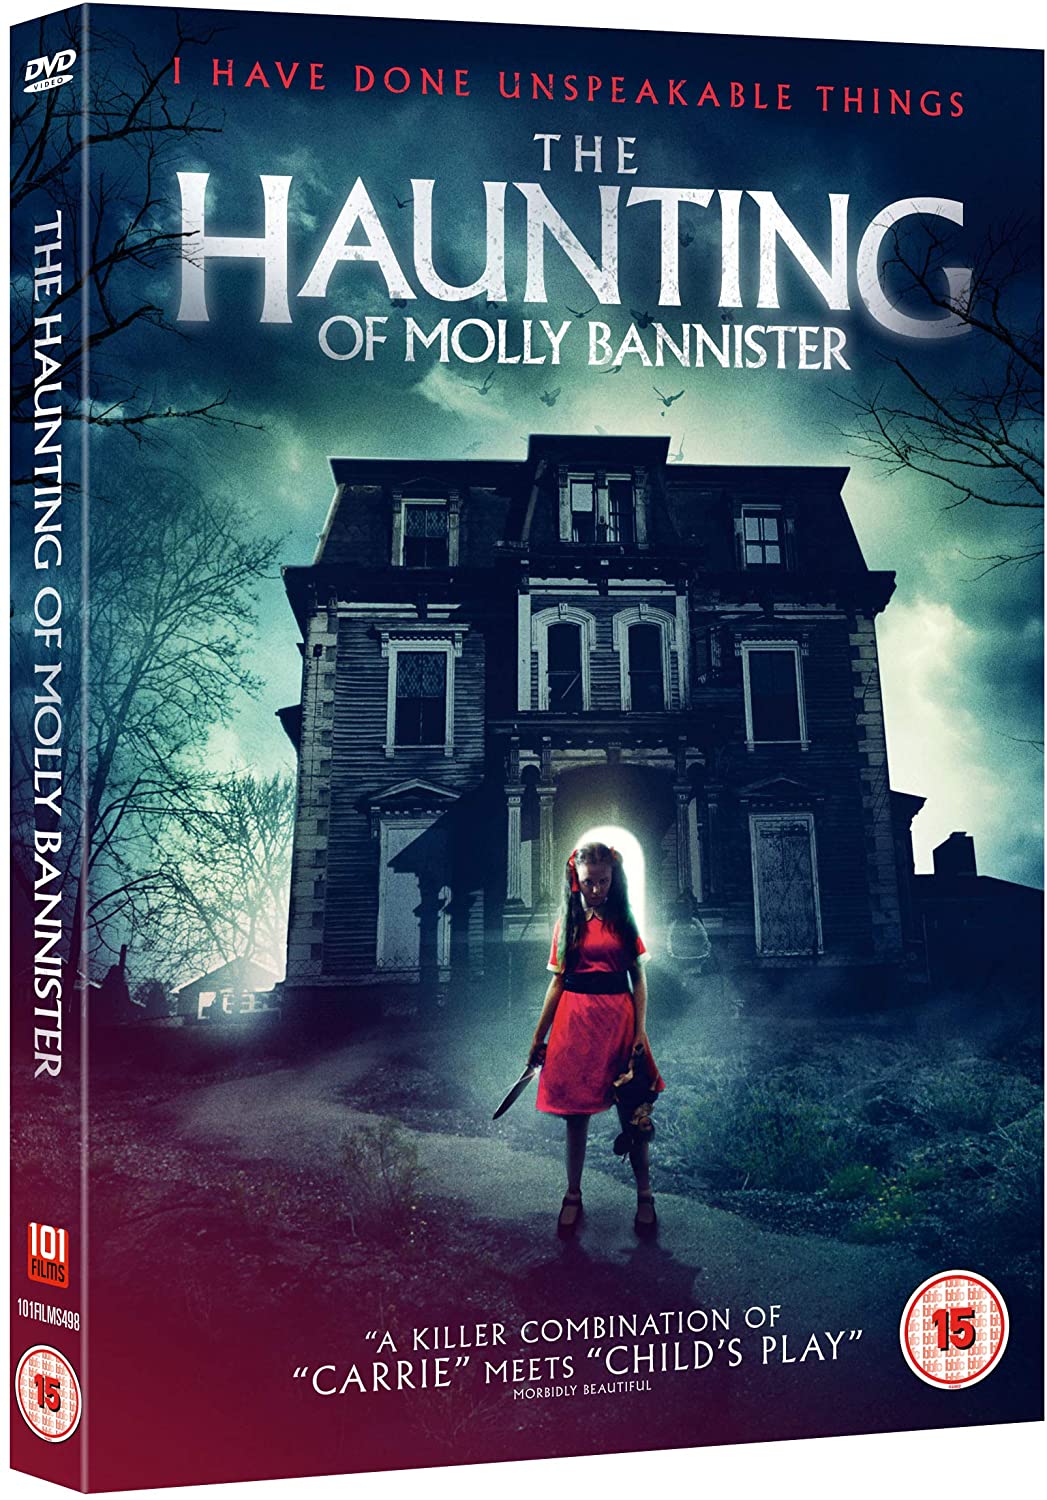 The Haunting of Molly Bannister - Horror [DVD]